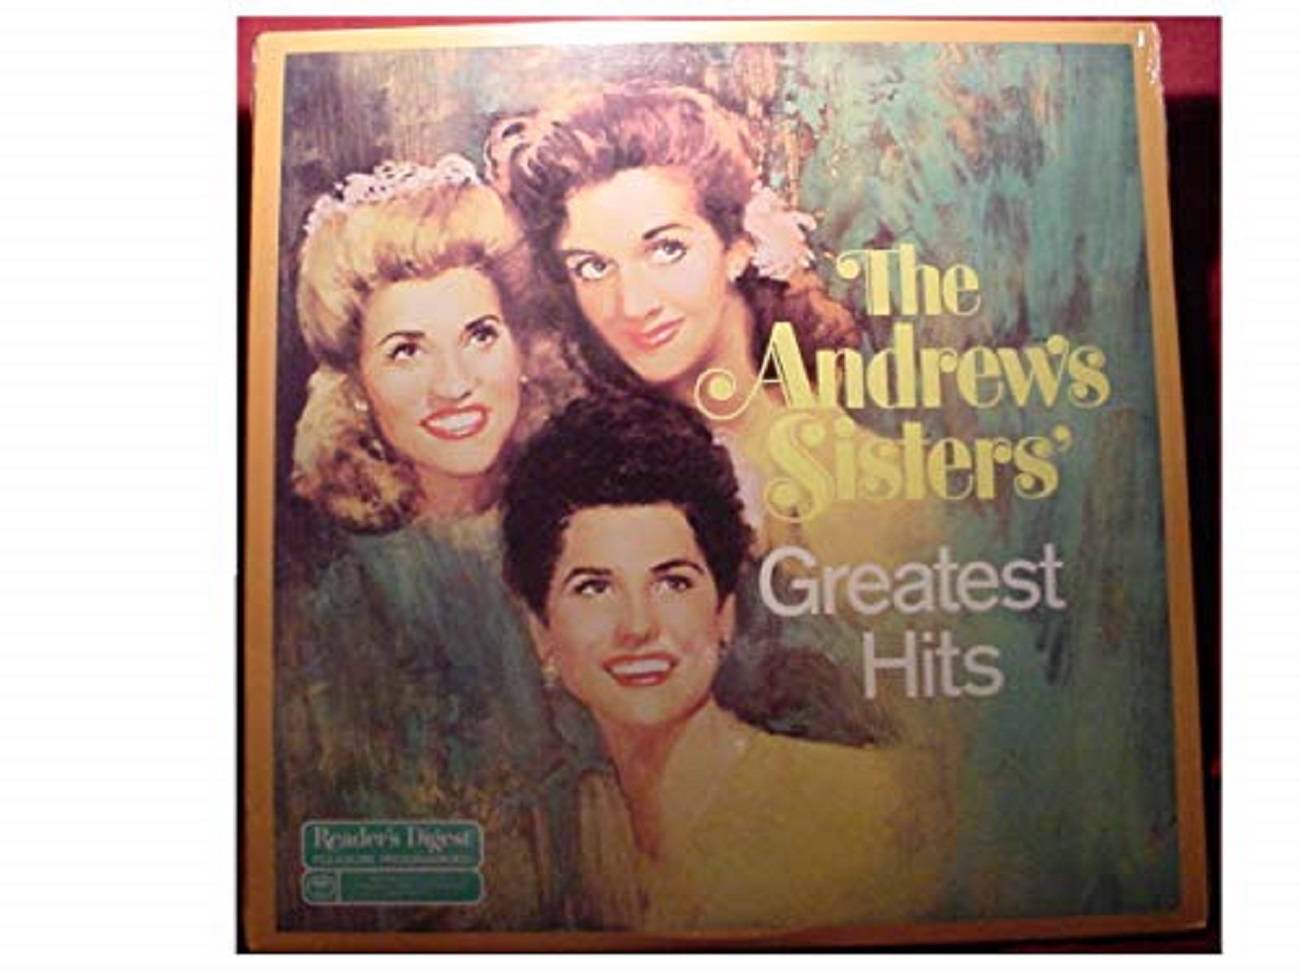 Andrew Sisters største hits albums cover. Wallpaper